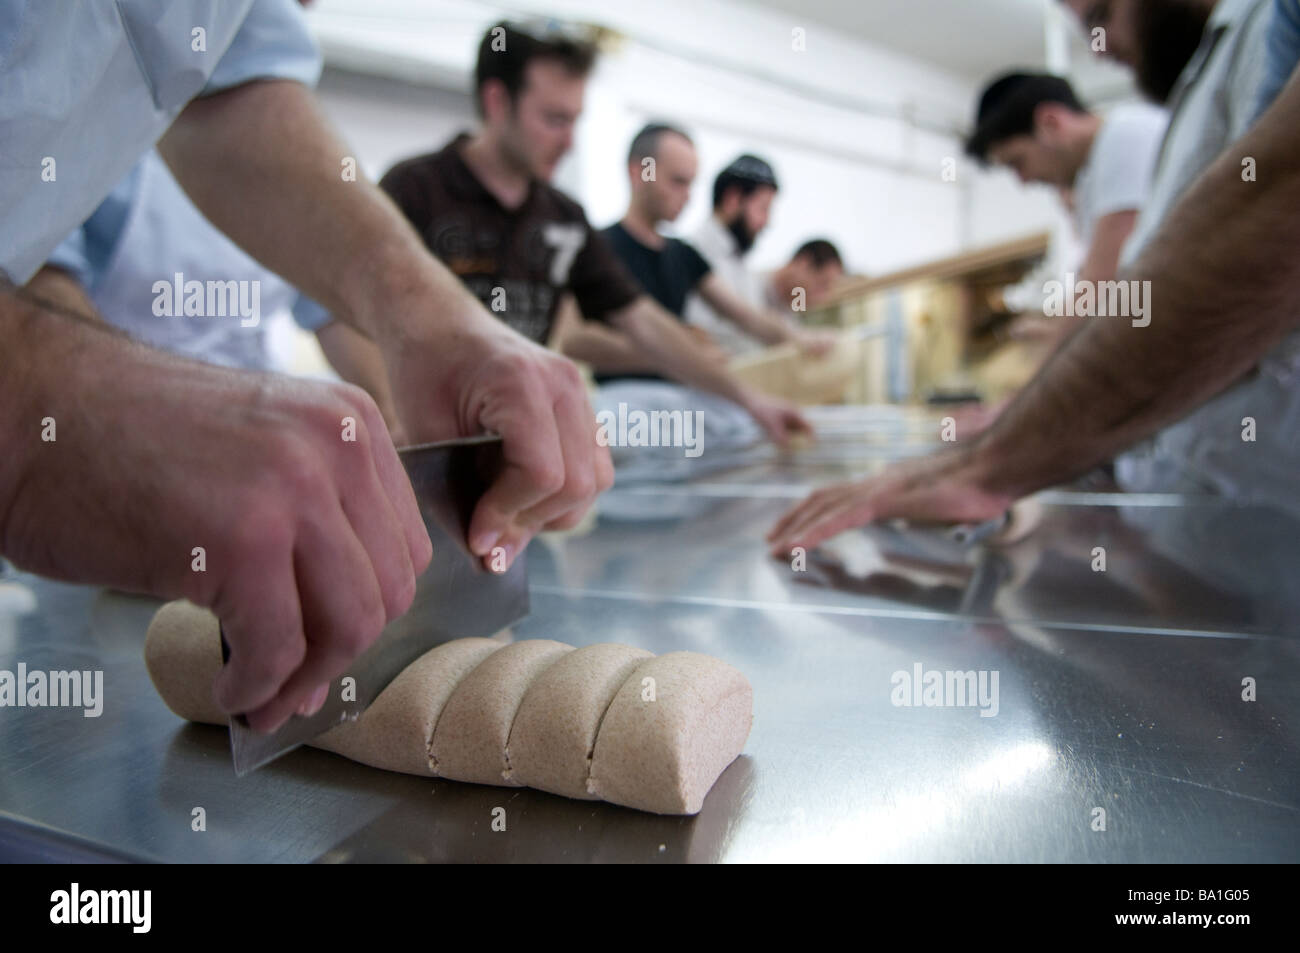 Orthodox Jews kneading Matzo dough in a bakery for traditional handmade Passover unleavened Matzo bread at Kfar Chabad bakery in Central Israel Stock Photo